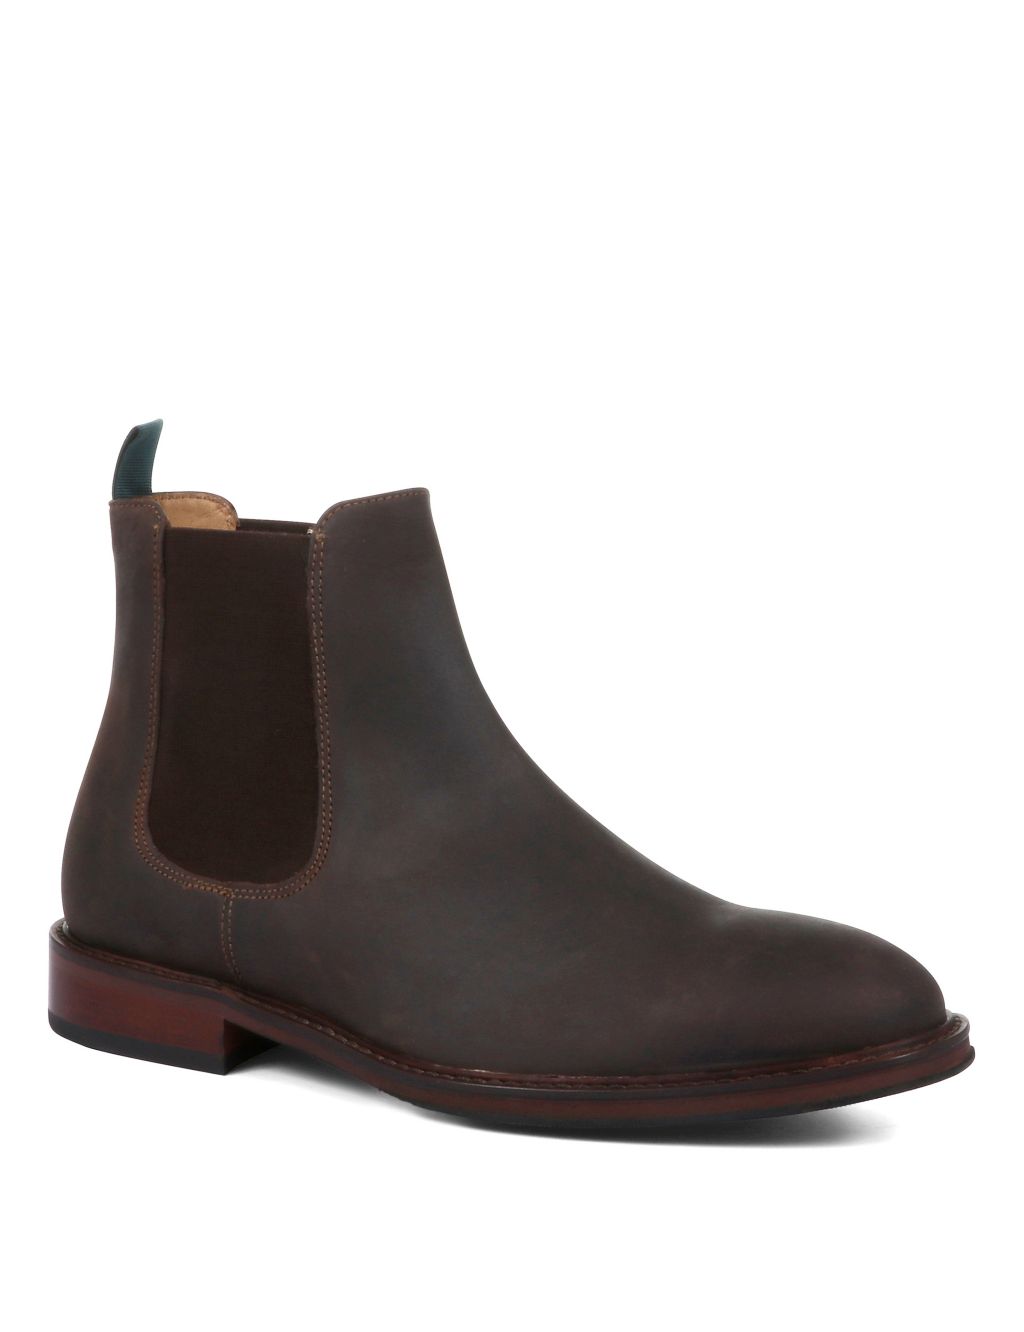 Leather Pull On Chelsea Boots image 2